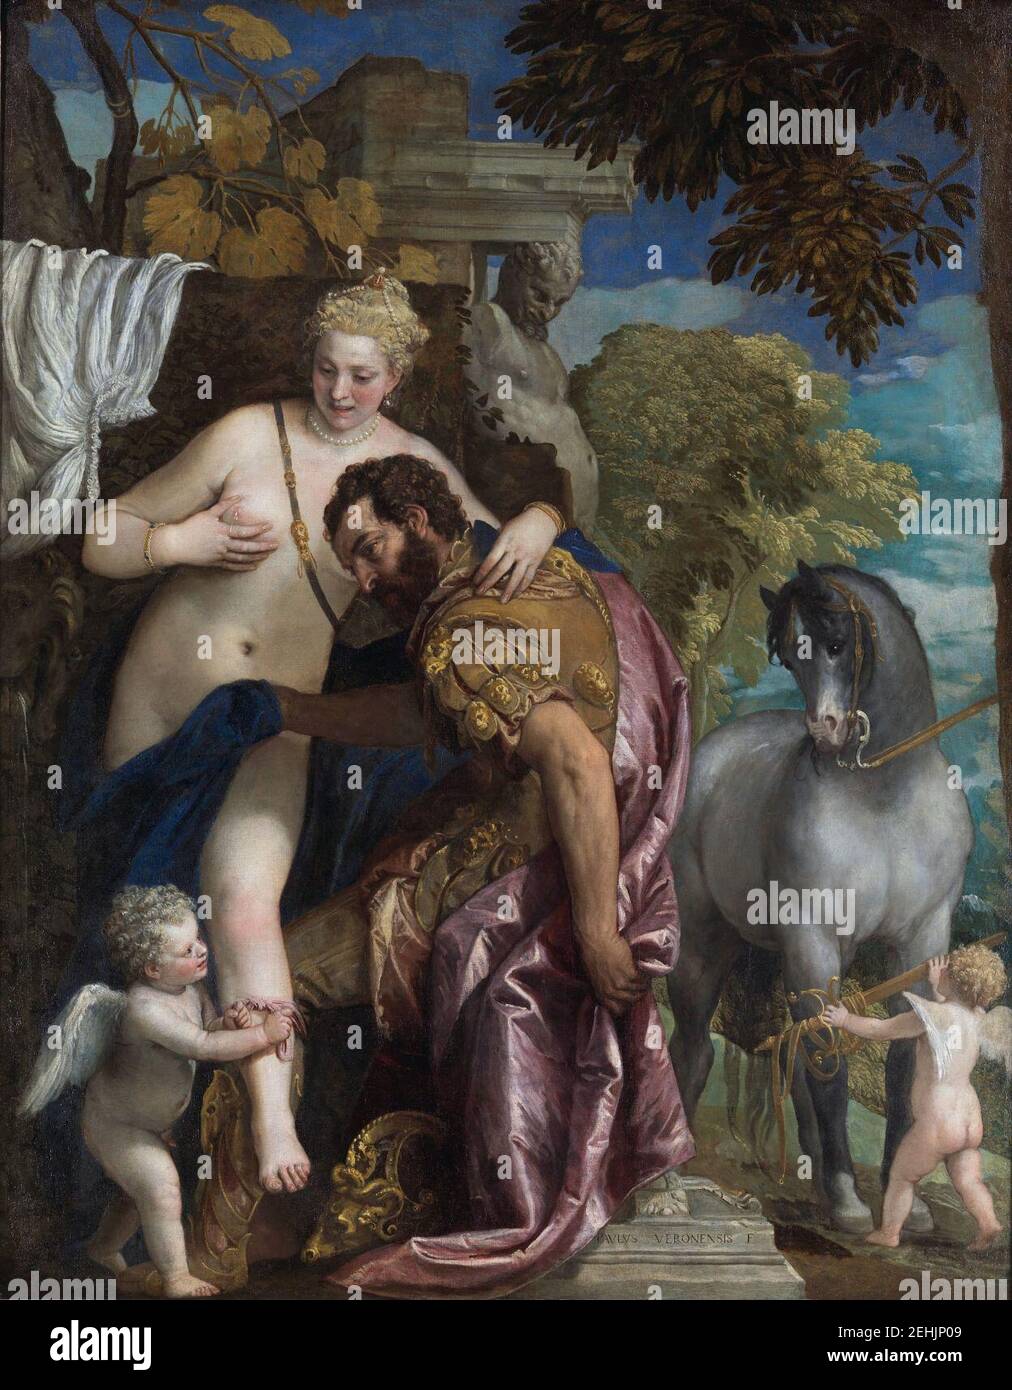 Paolo Veronese - Mars and Venus United by Love Stock Photo